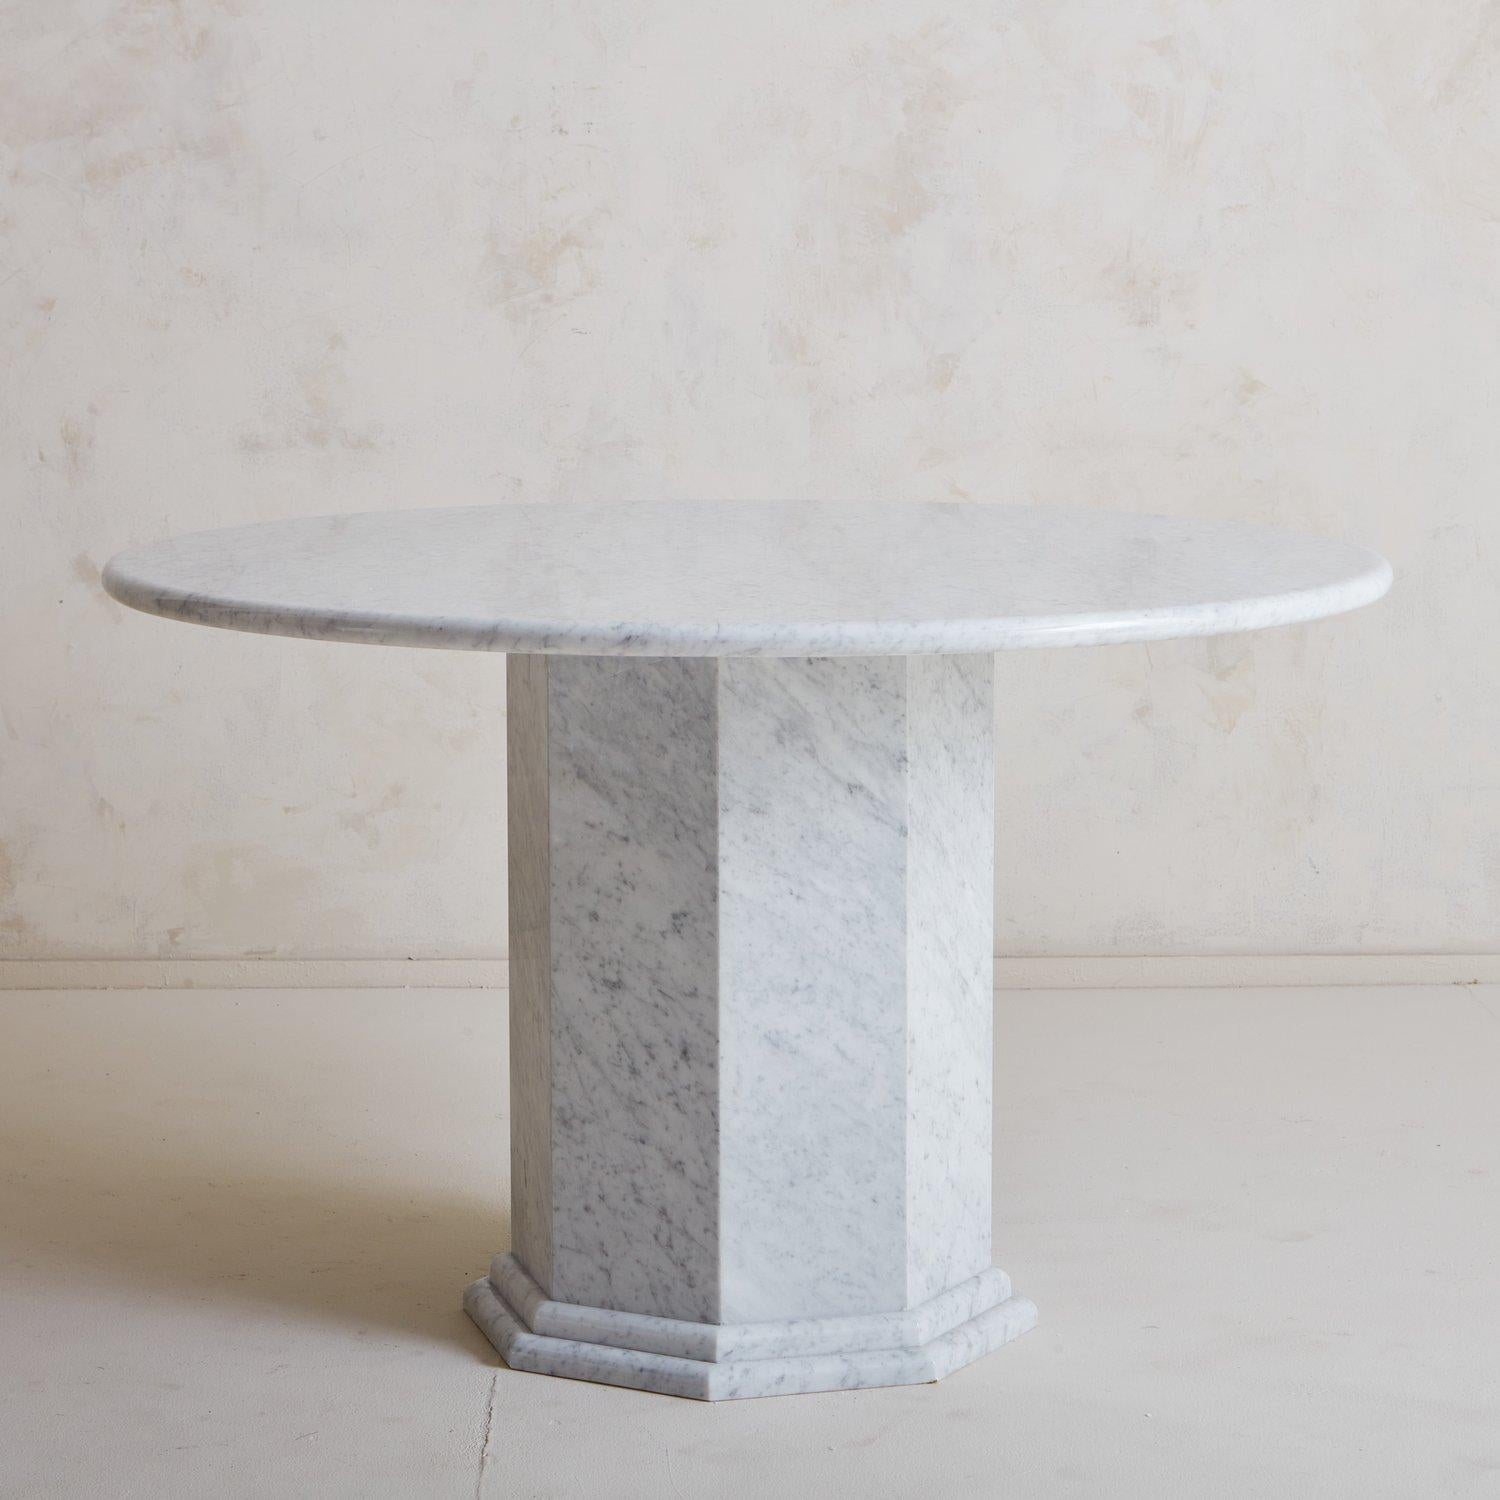 A stunning custom Carrara marble dining table designed in house by South Loop Loft. This table features a 1” thick round top resting on an octagonal mitered edge base with a double banded-edge detail.

This table is available on a Made to Order